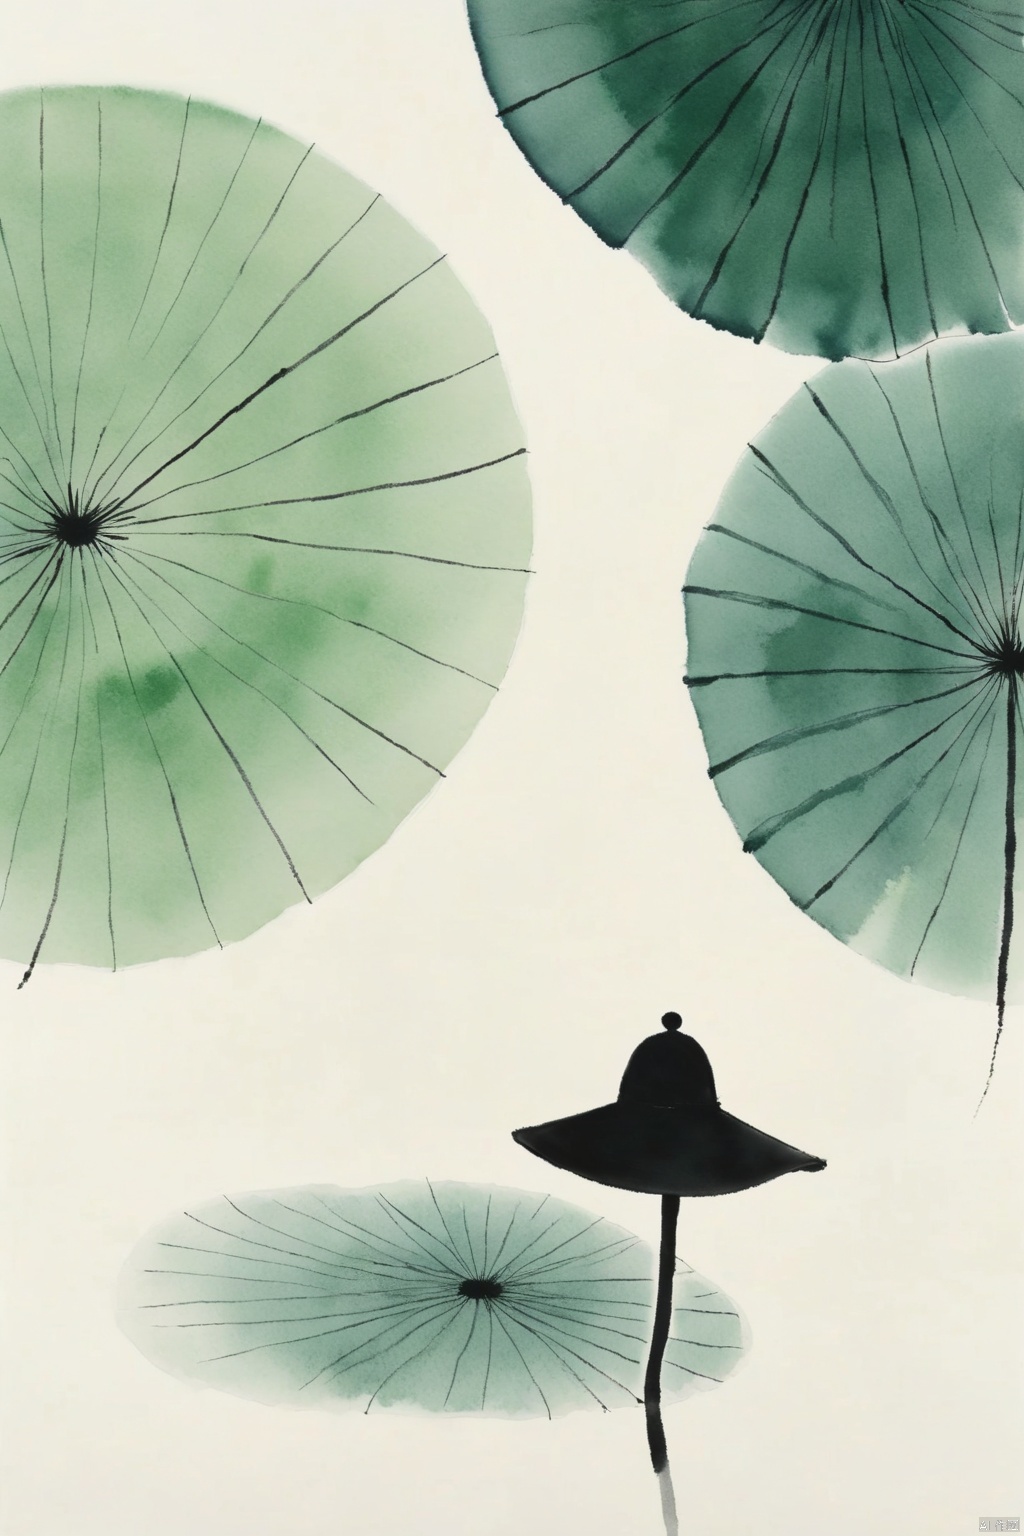 A lotus canopy, mantle blowing with the wind, light sitting on it, straw hat, splash-ink freehand, minimalist ink painting